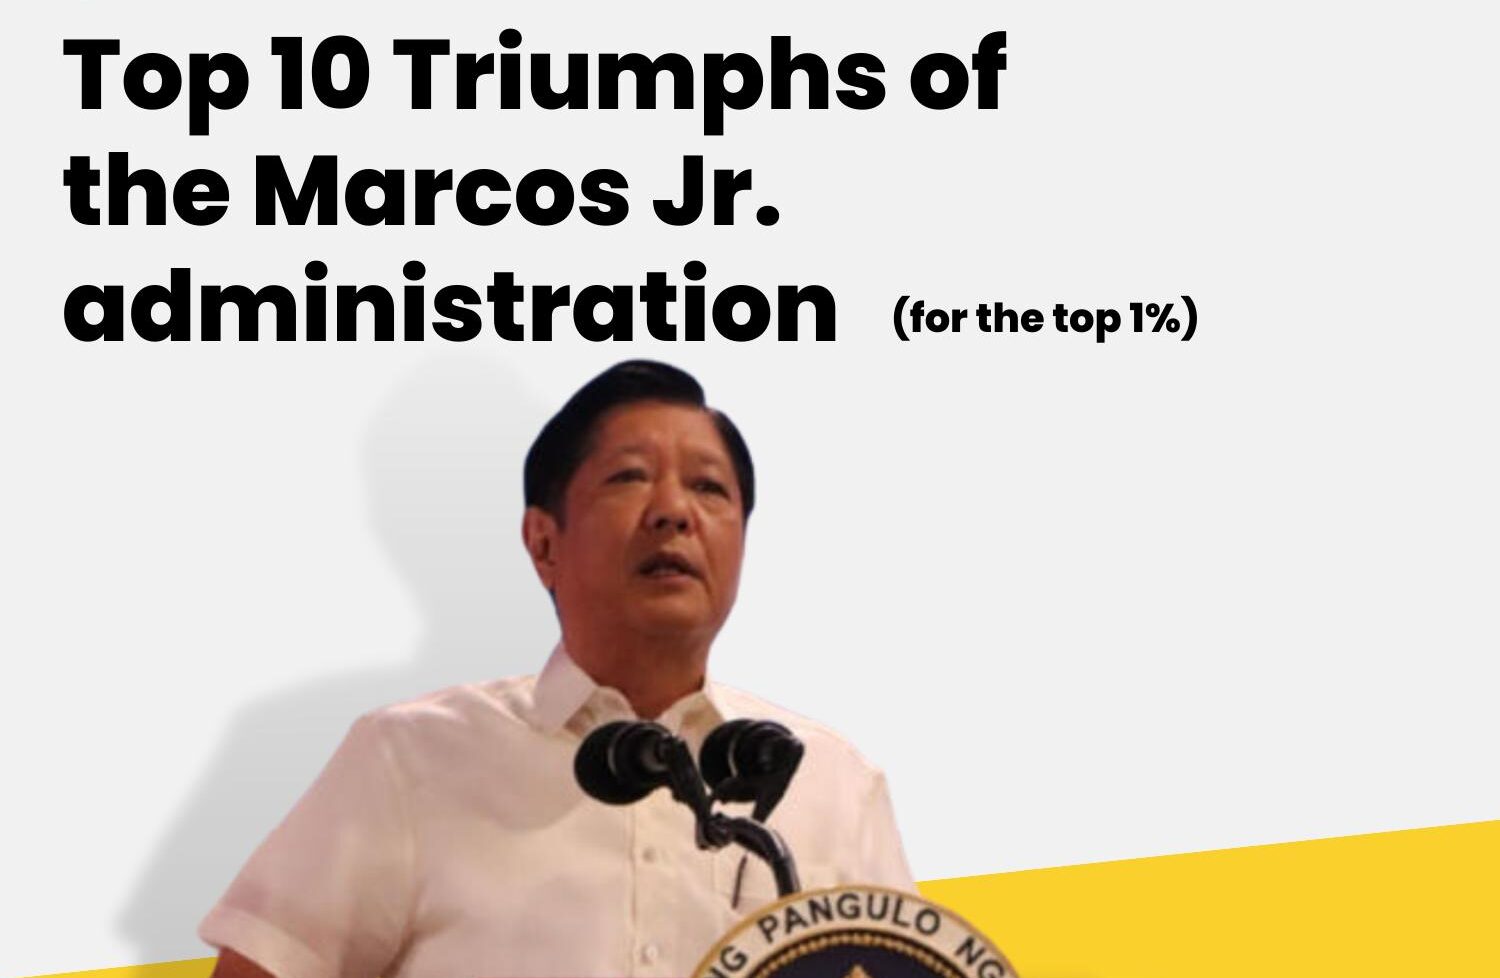 Top 10 triumphs of the Marcos Jr. administration (for the top 1%)